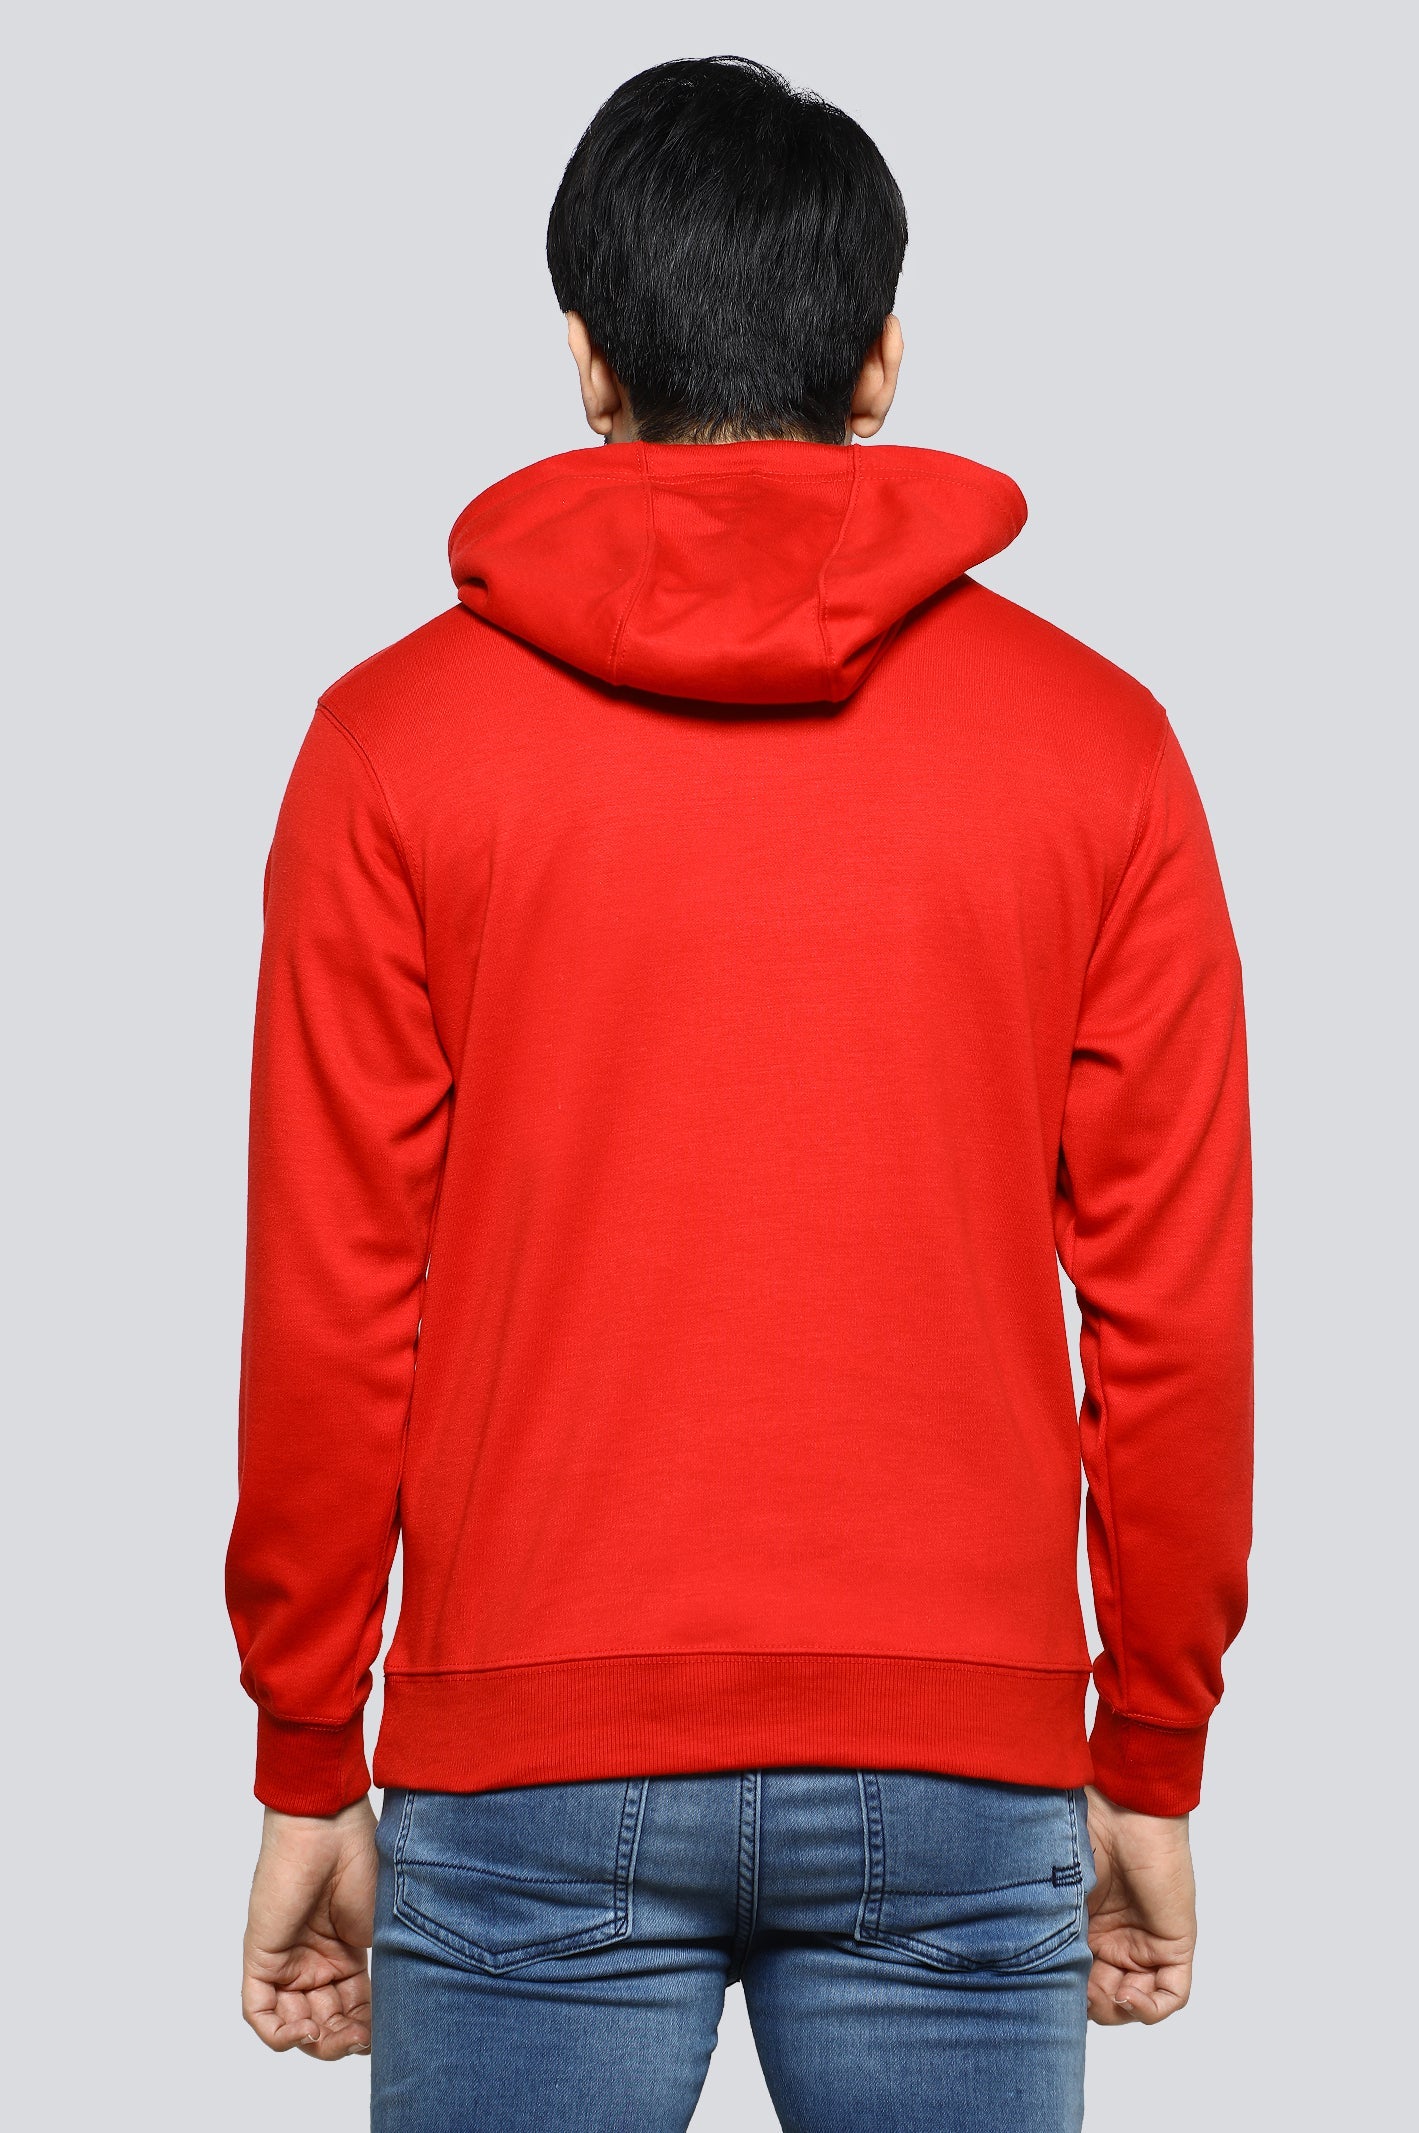 Red Printed Pullover Hoodie for Men's